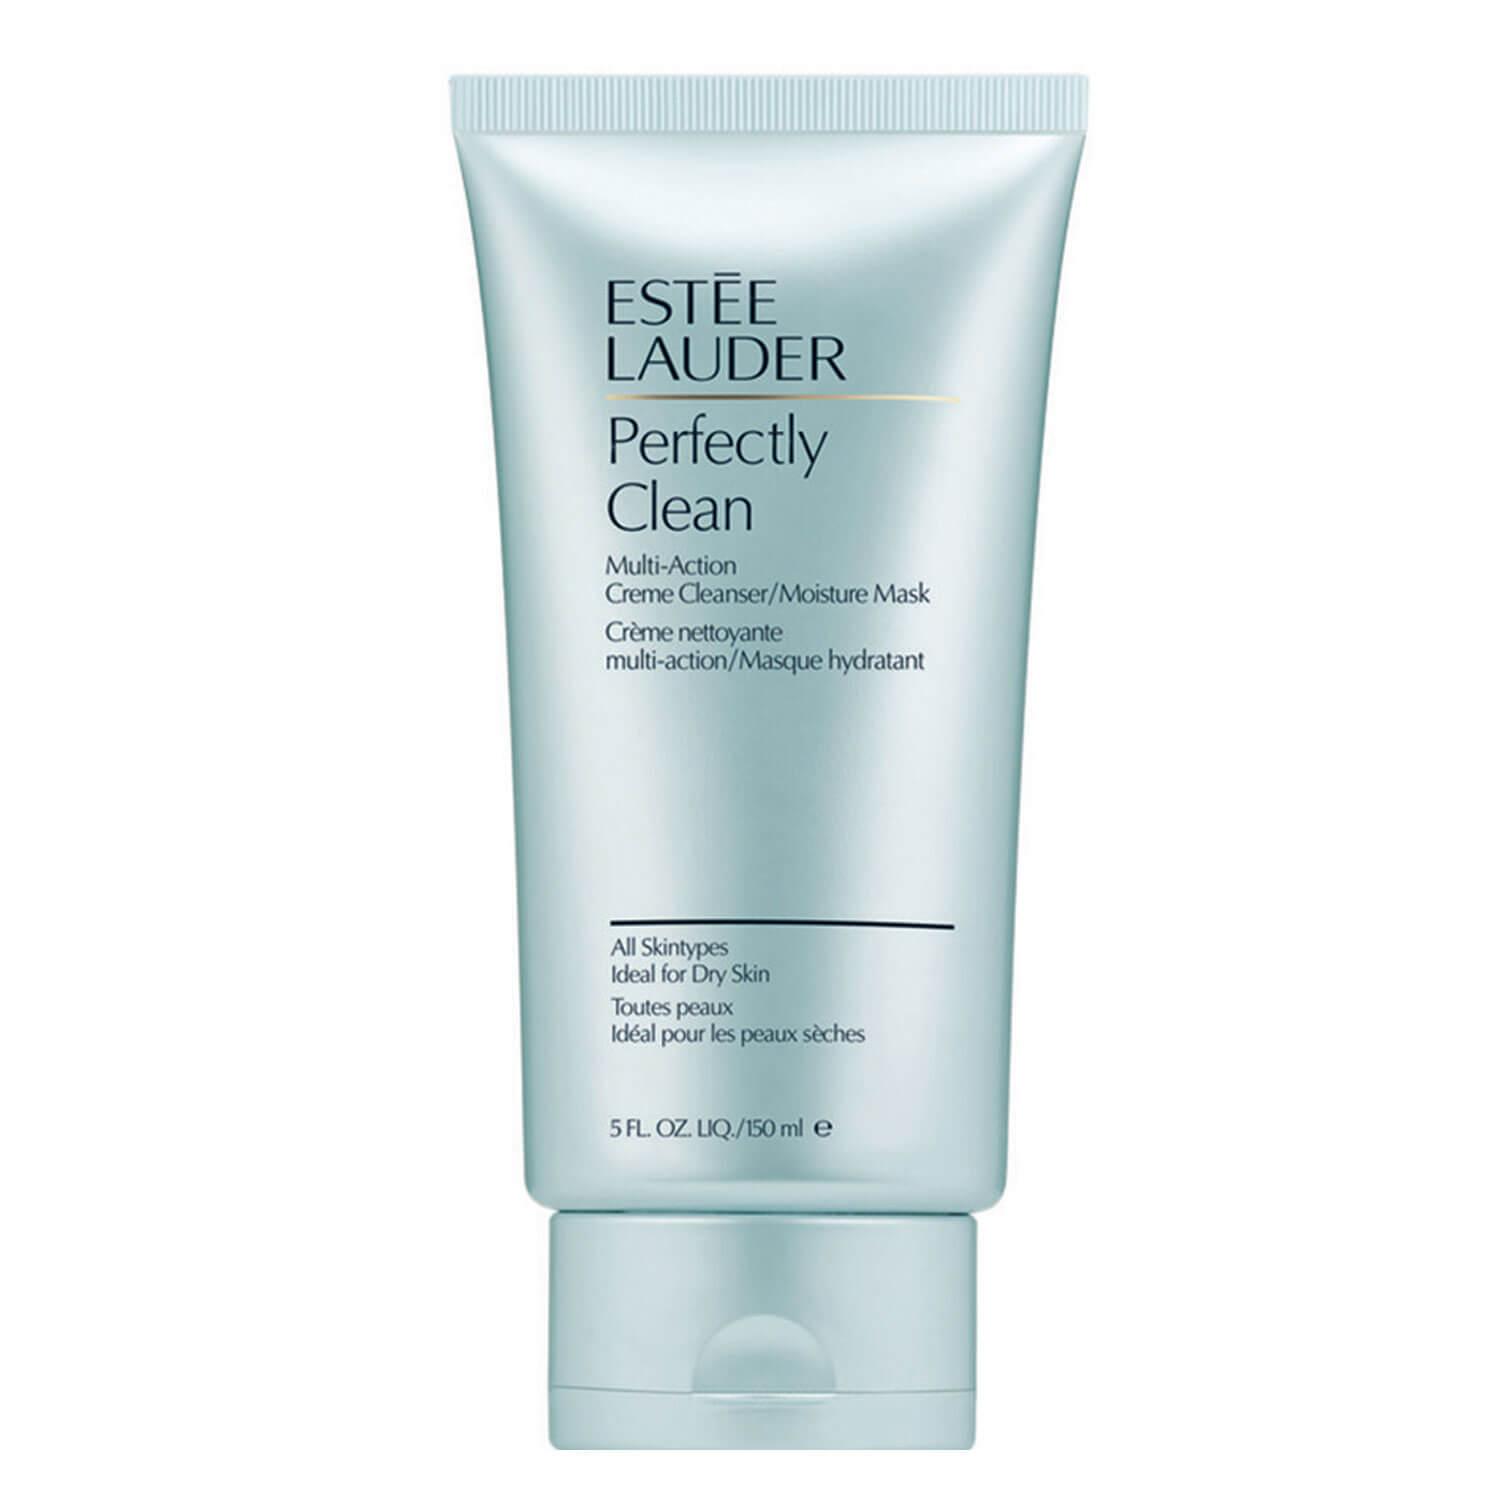 Perfectly Clean - Multi-Action Creme Cleanser/Moisture Mask